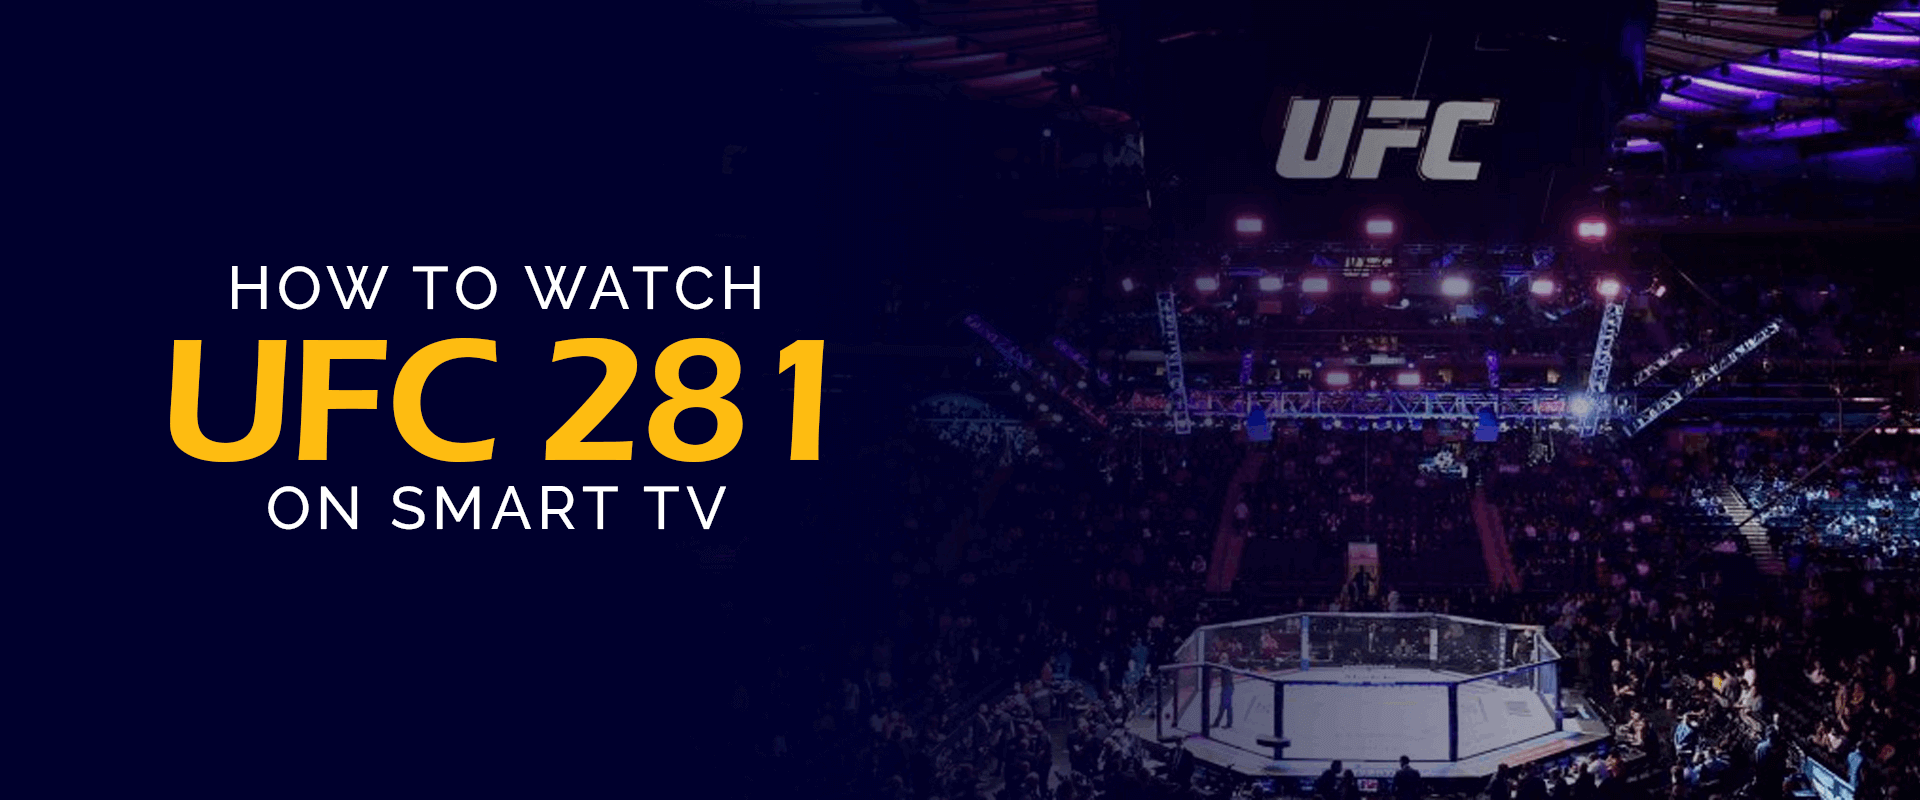 How to Watch UFC 281 on Smart TV